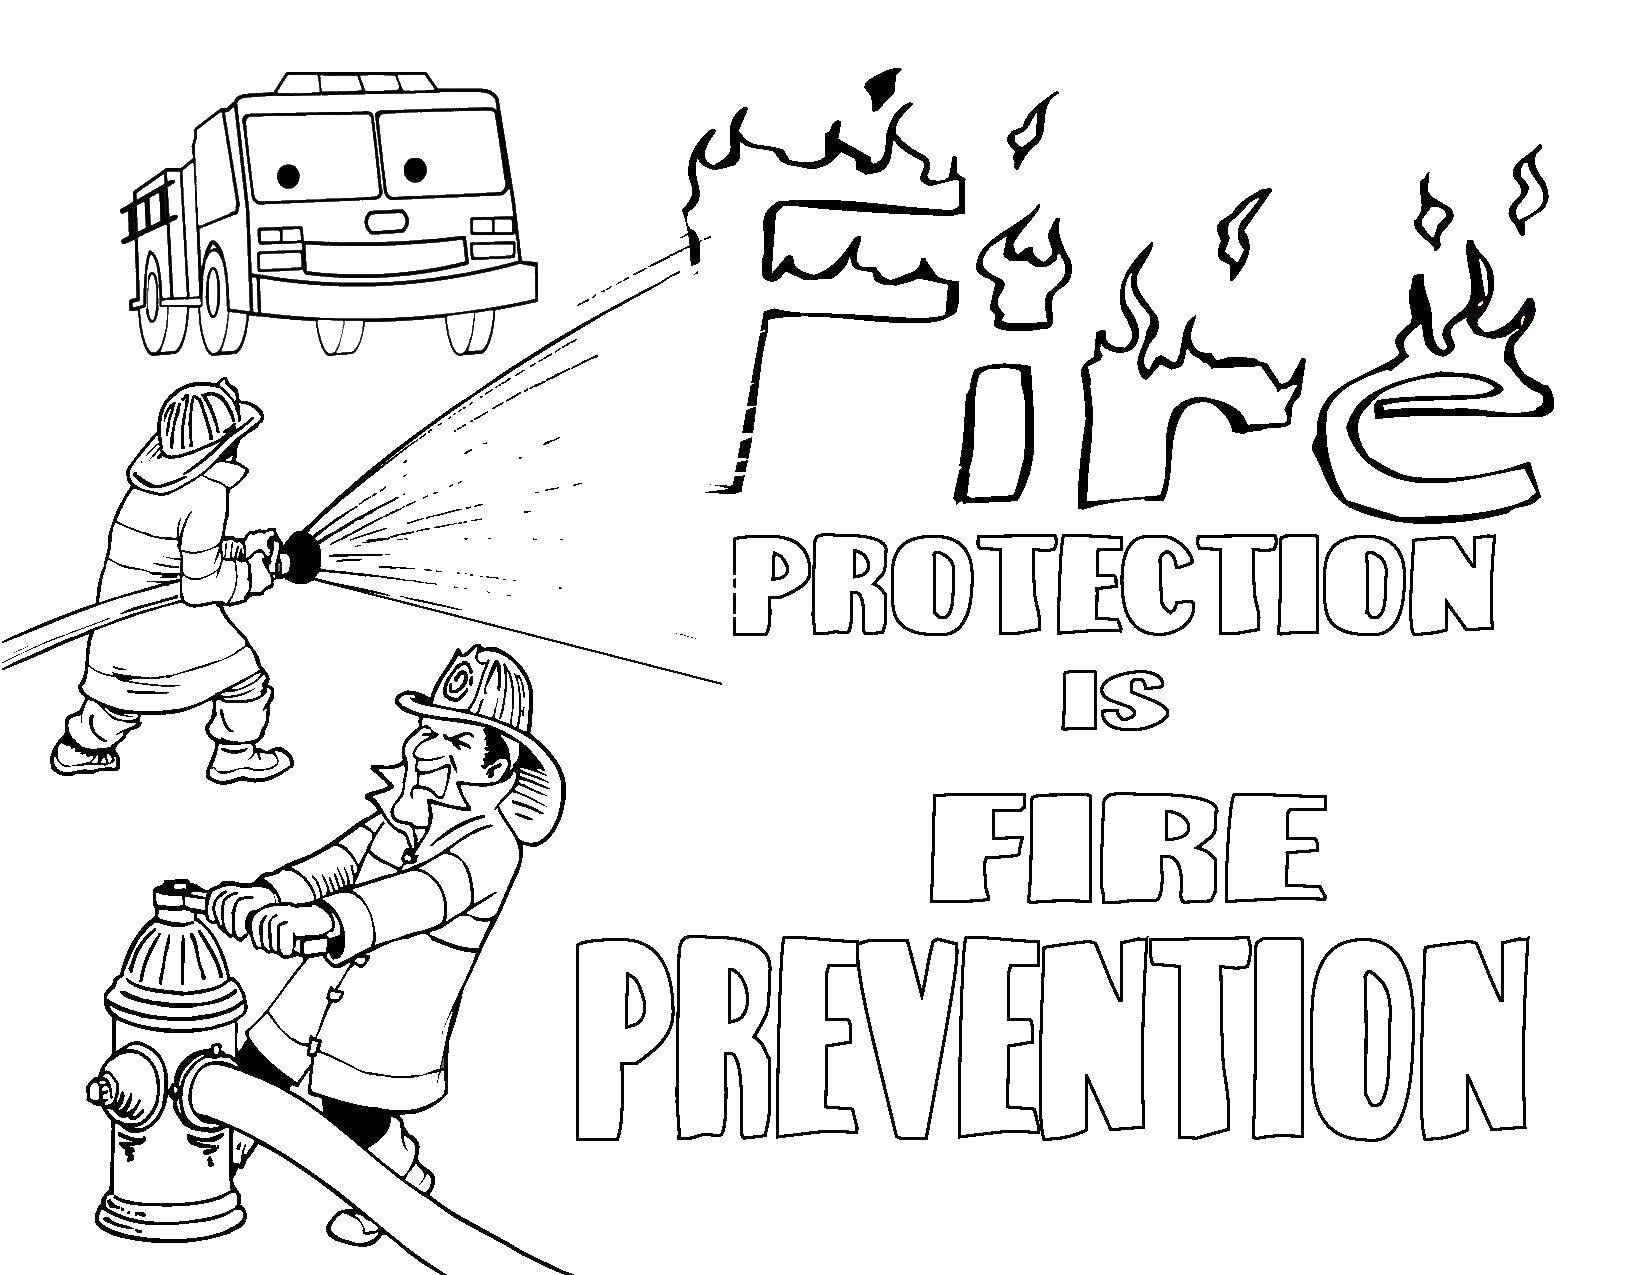 Coloring Fire. Category Fire. Tags:  fire, fire, fire engine.